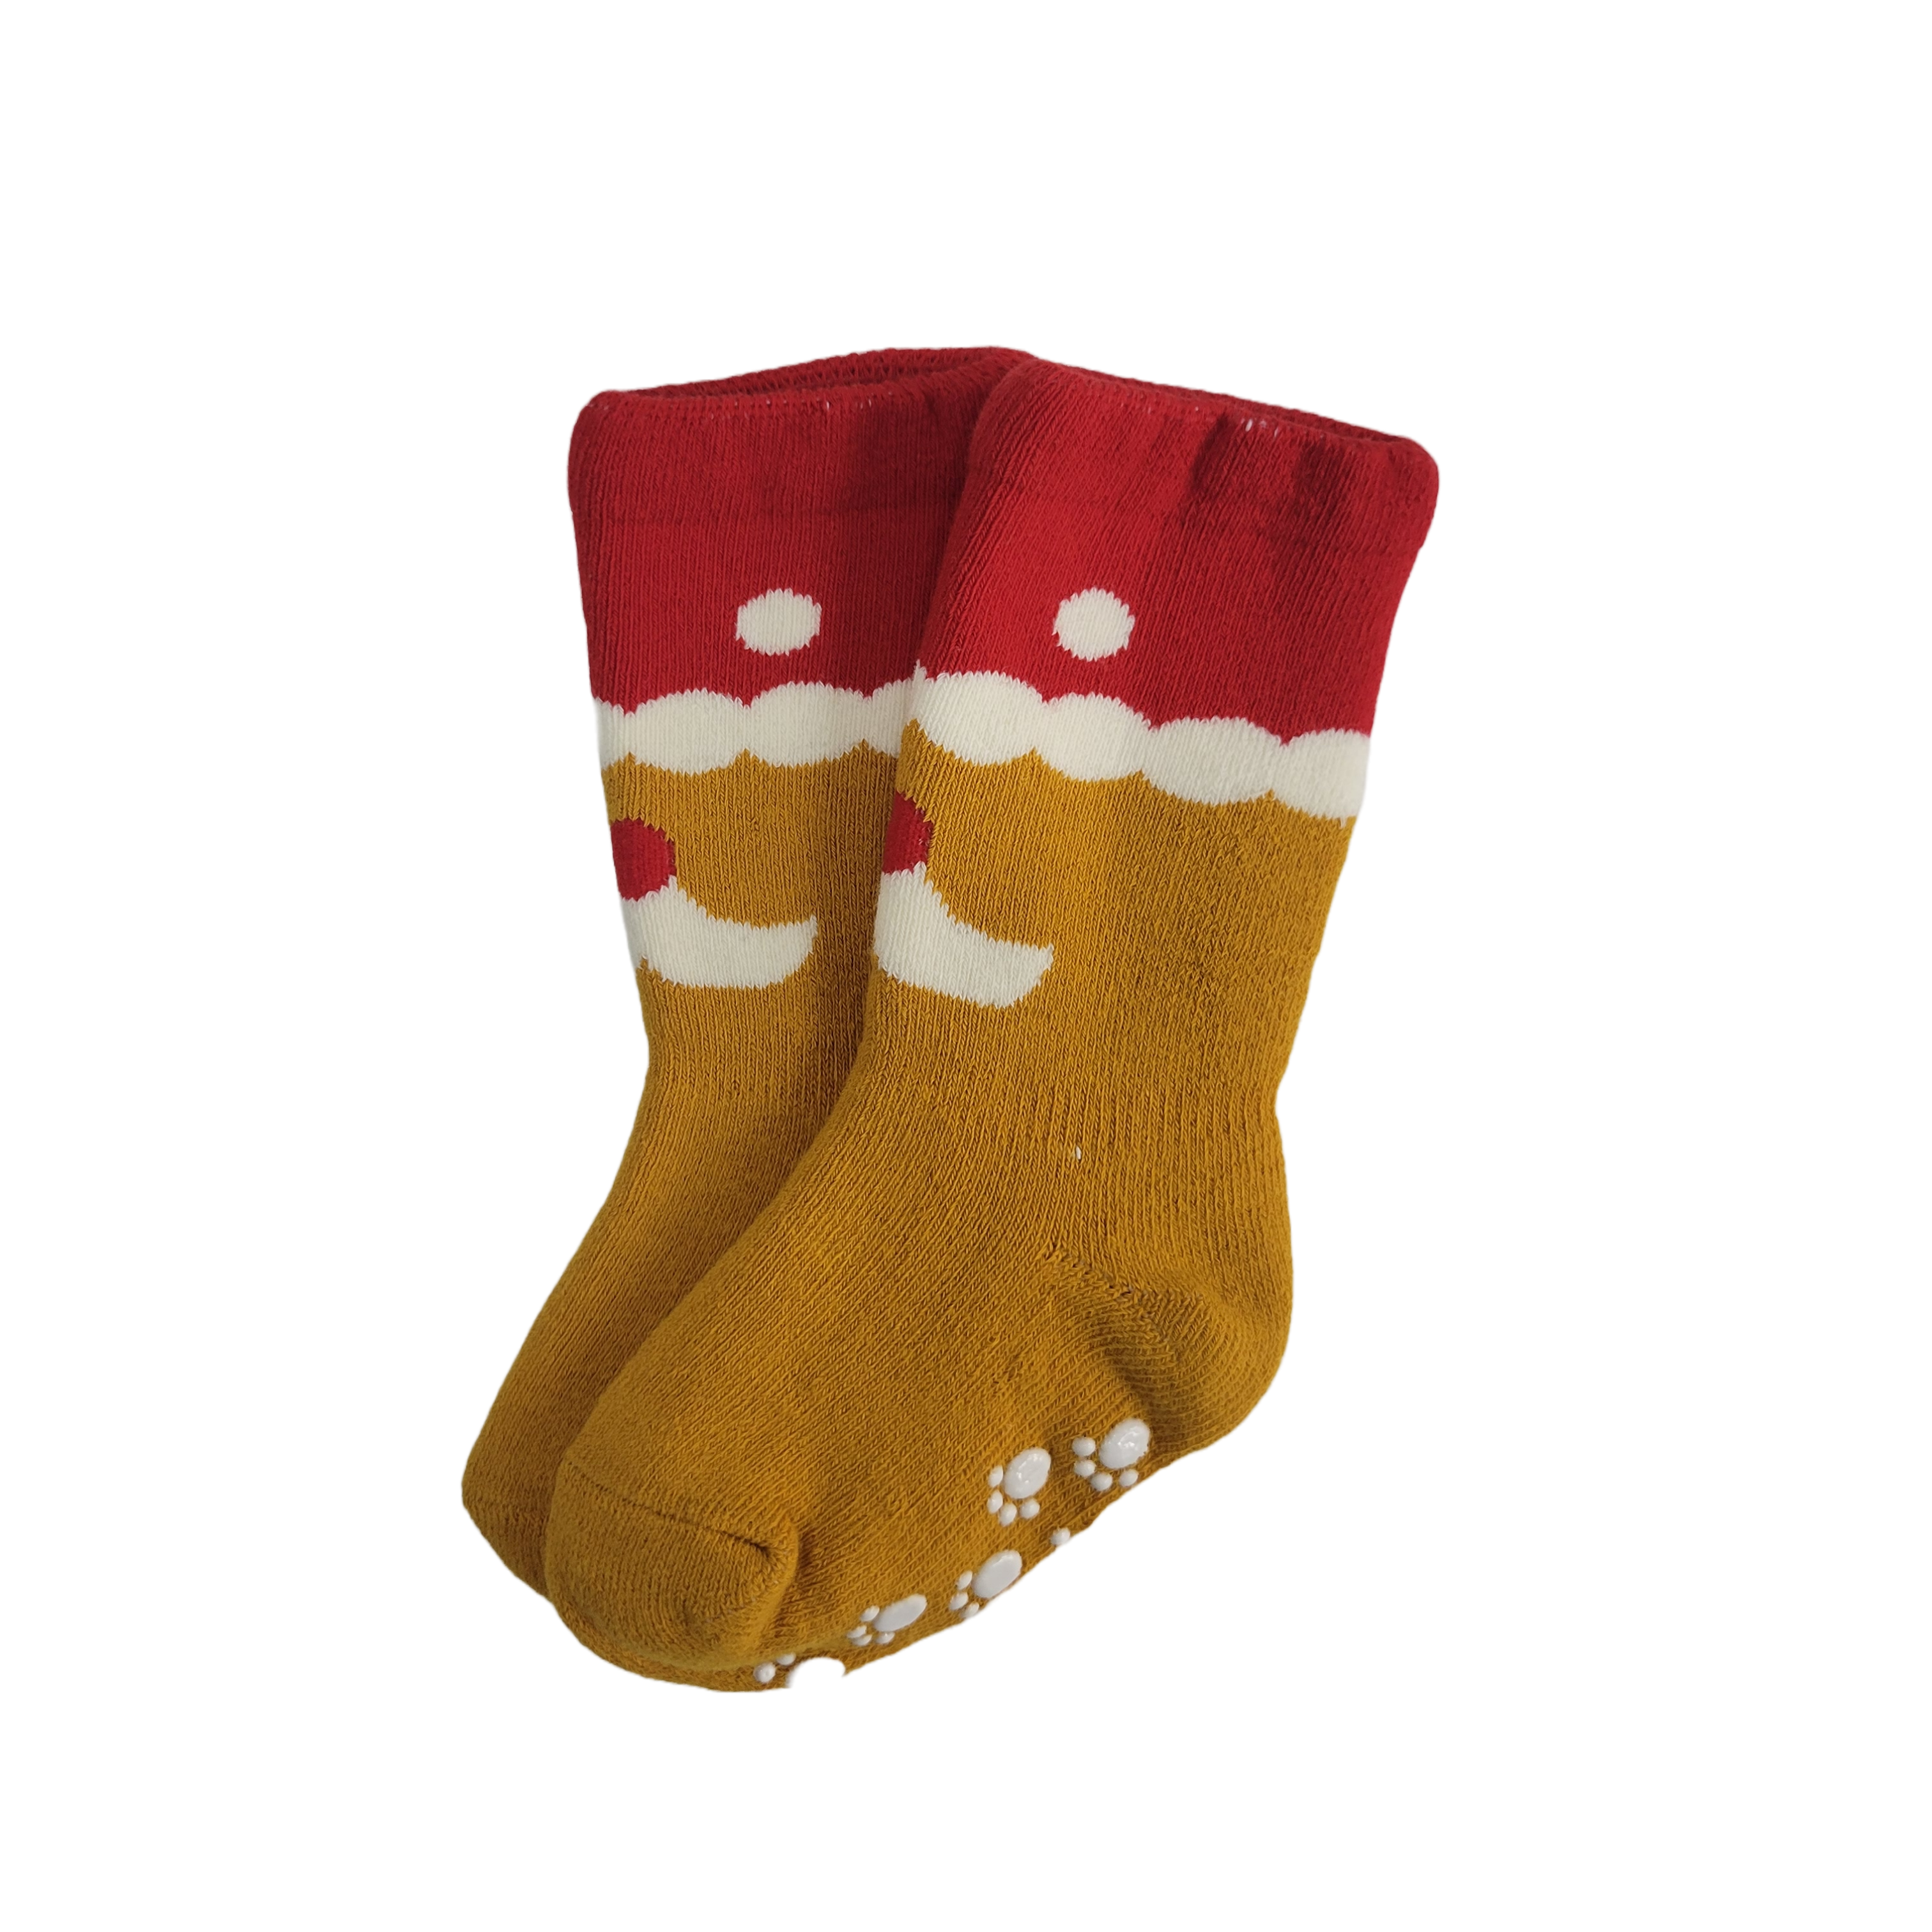 Non-Skid Christmas Themed Socks for Kids - Ages (6 mo.-1yr & 1 to 2yr)